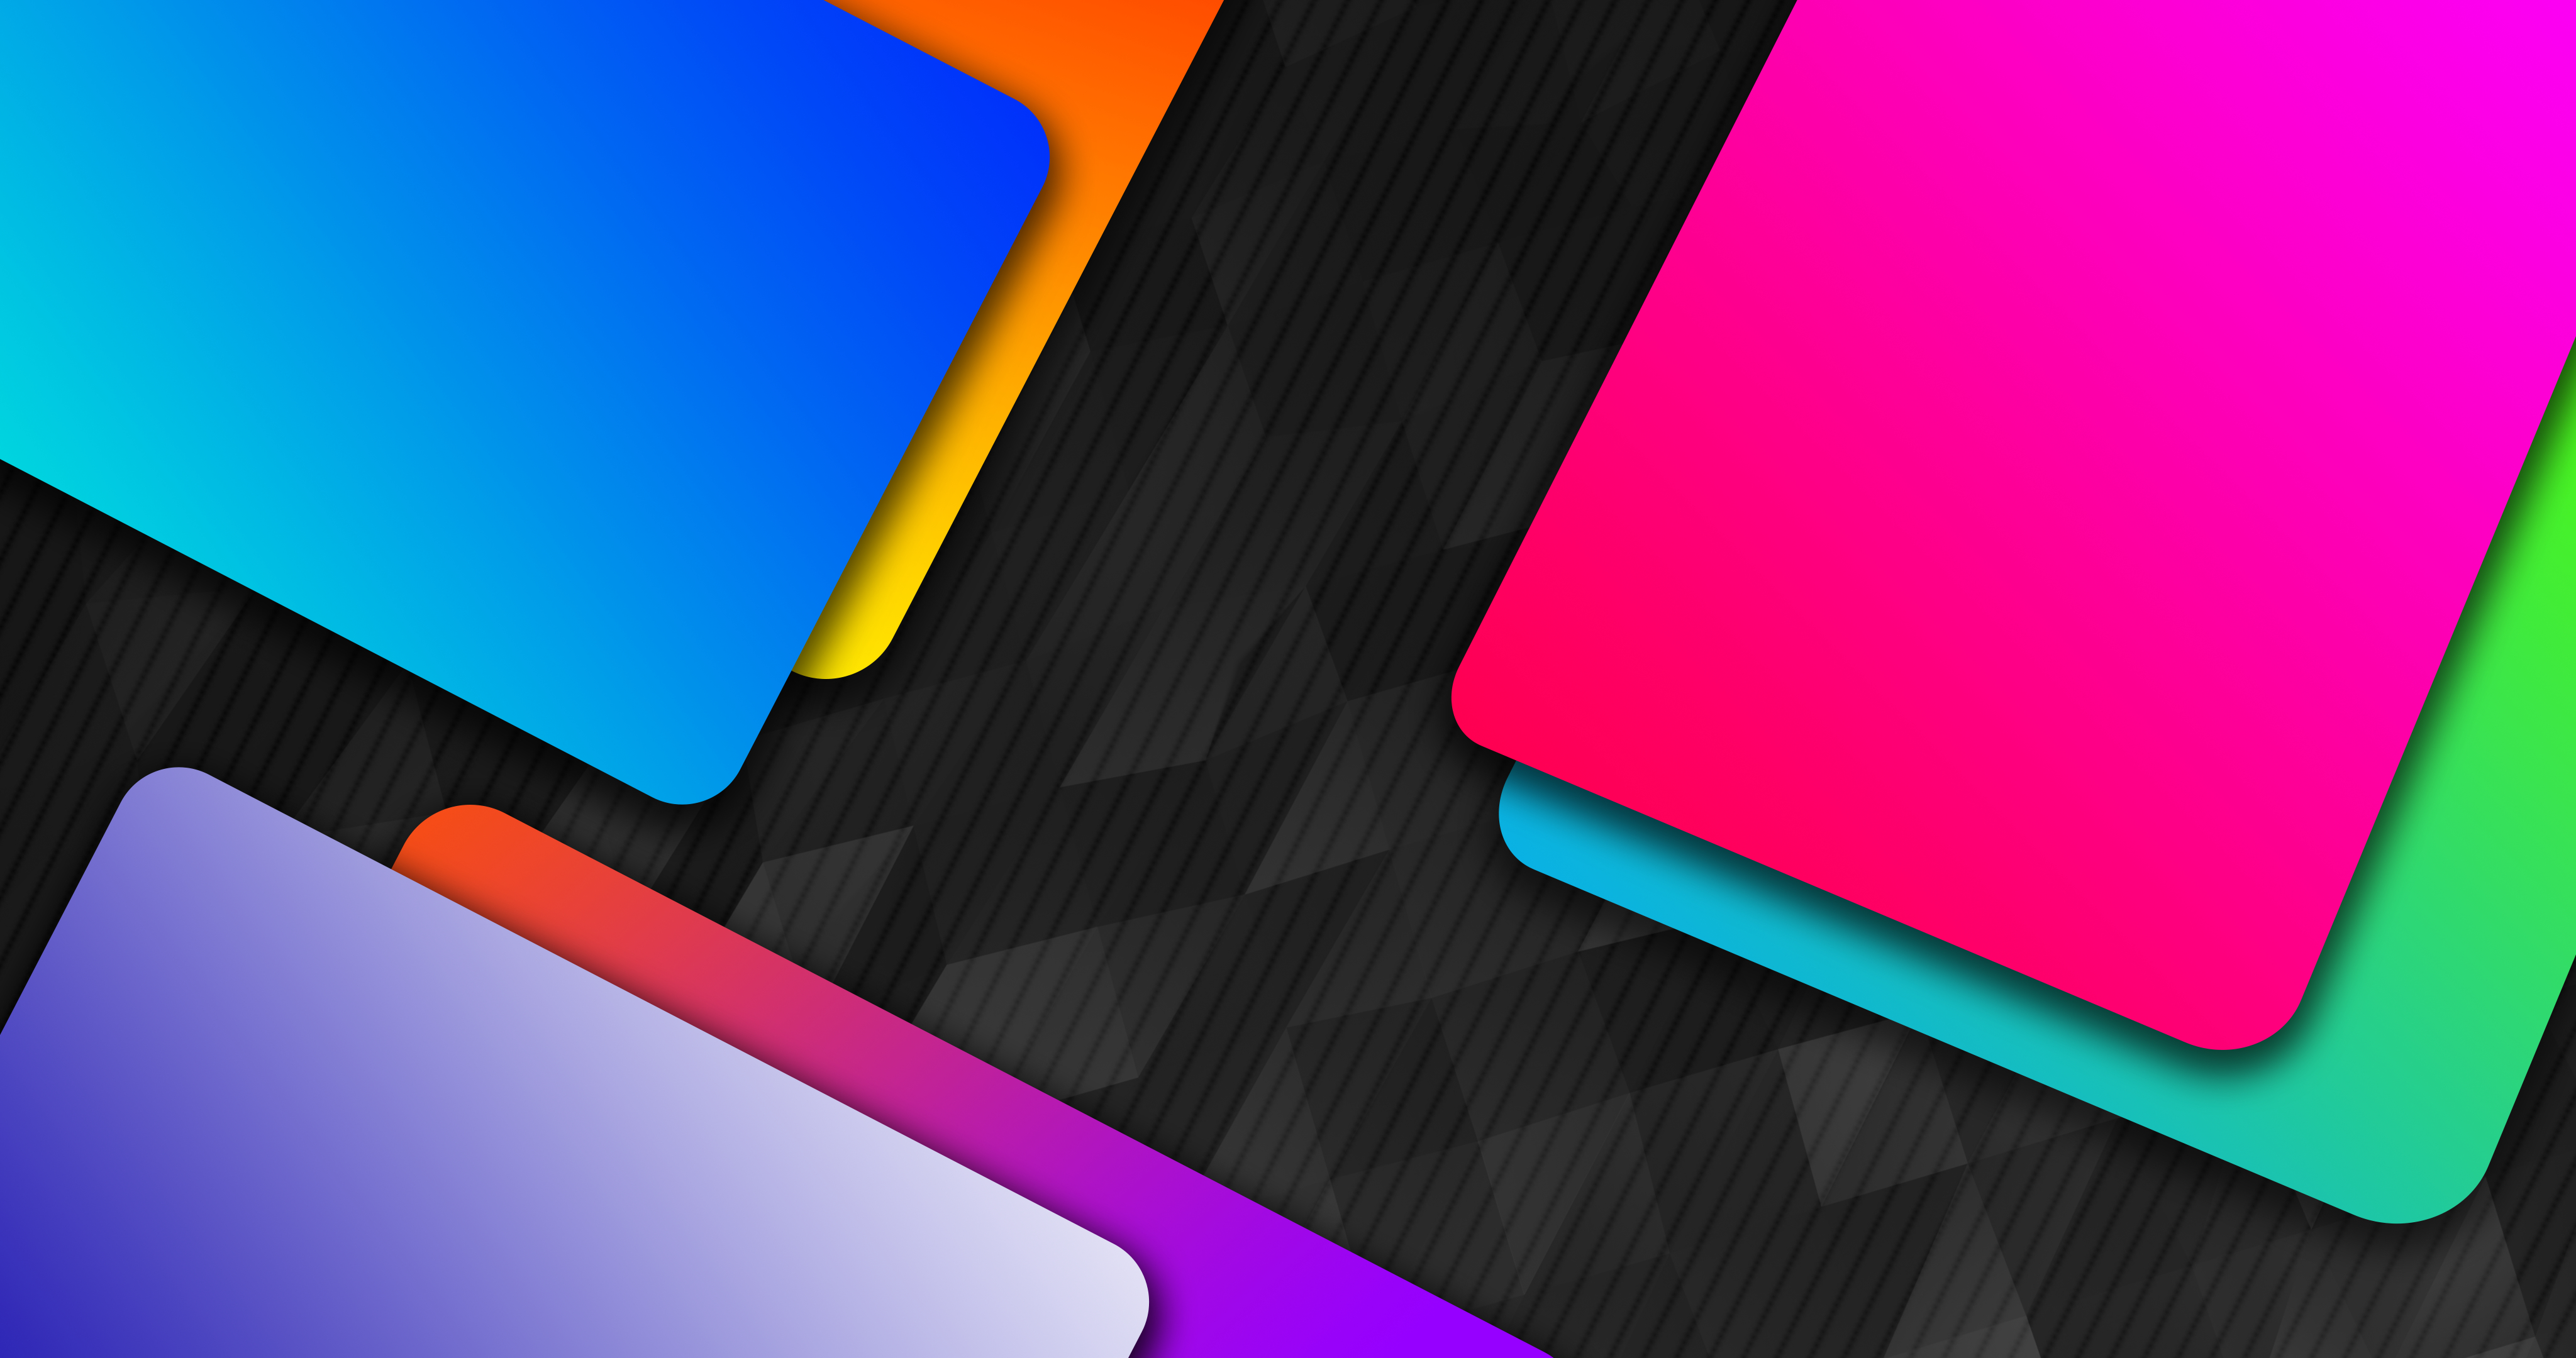 General 4096x2160 dark colorful abstract shapes simple background minimalism